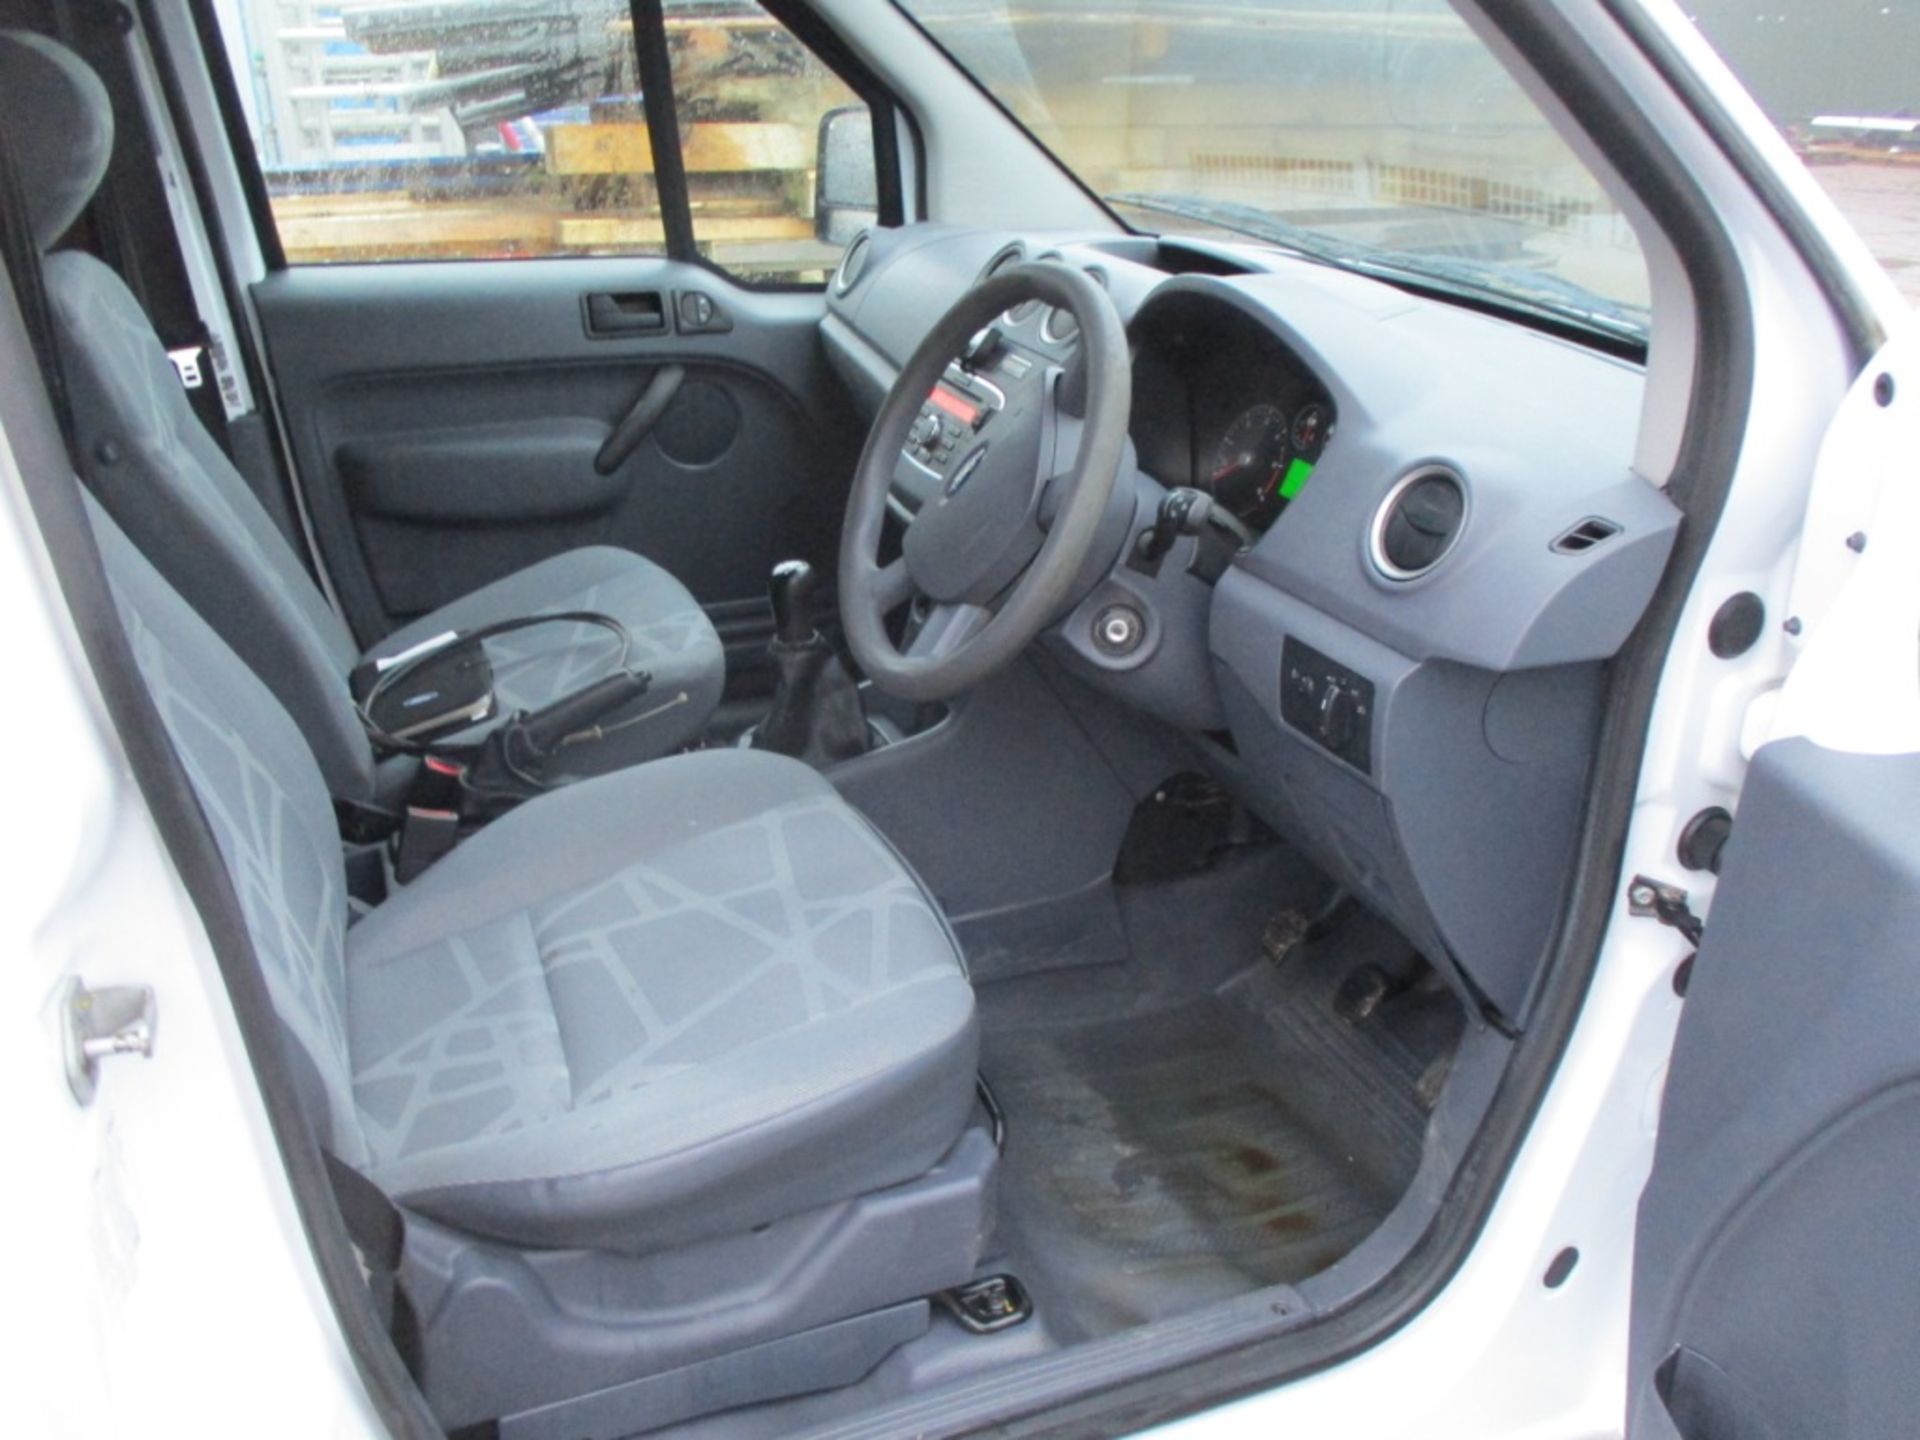 FORD TRANSIT CONNECT 75 T200 PANEL VAN - Image 2 of 9